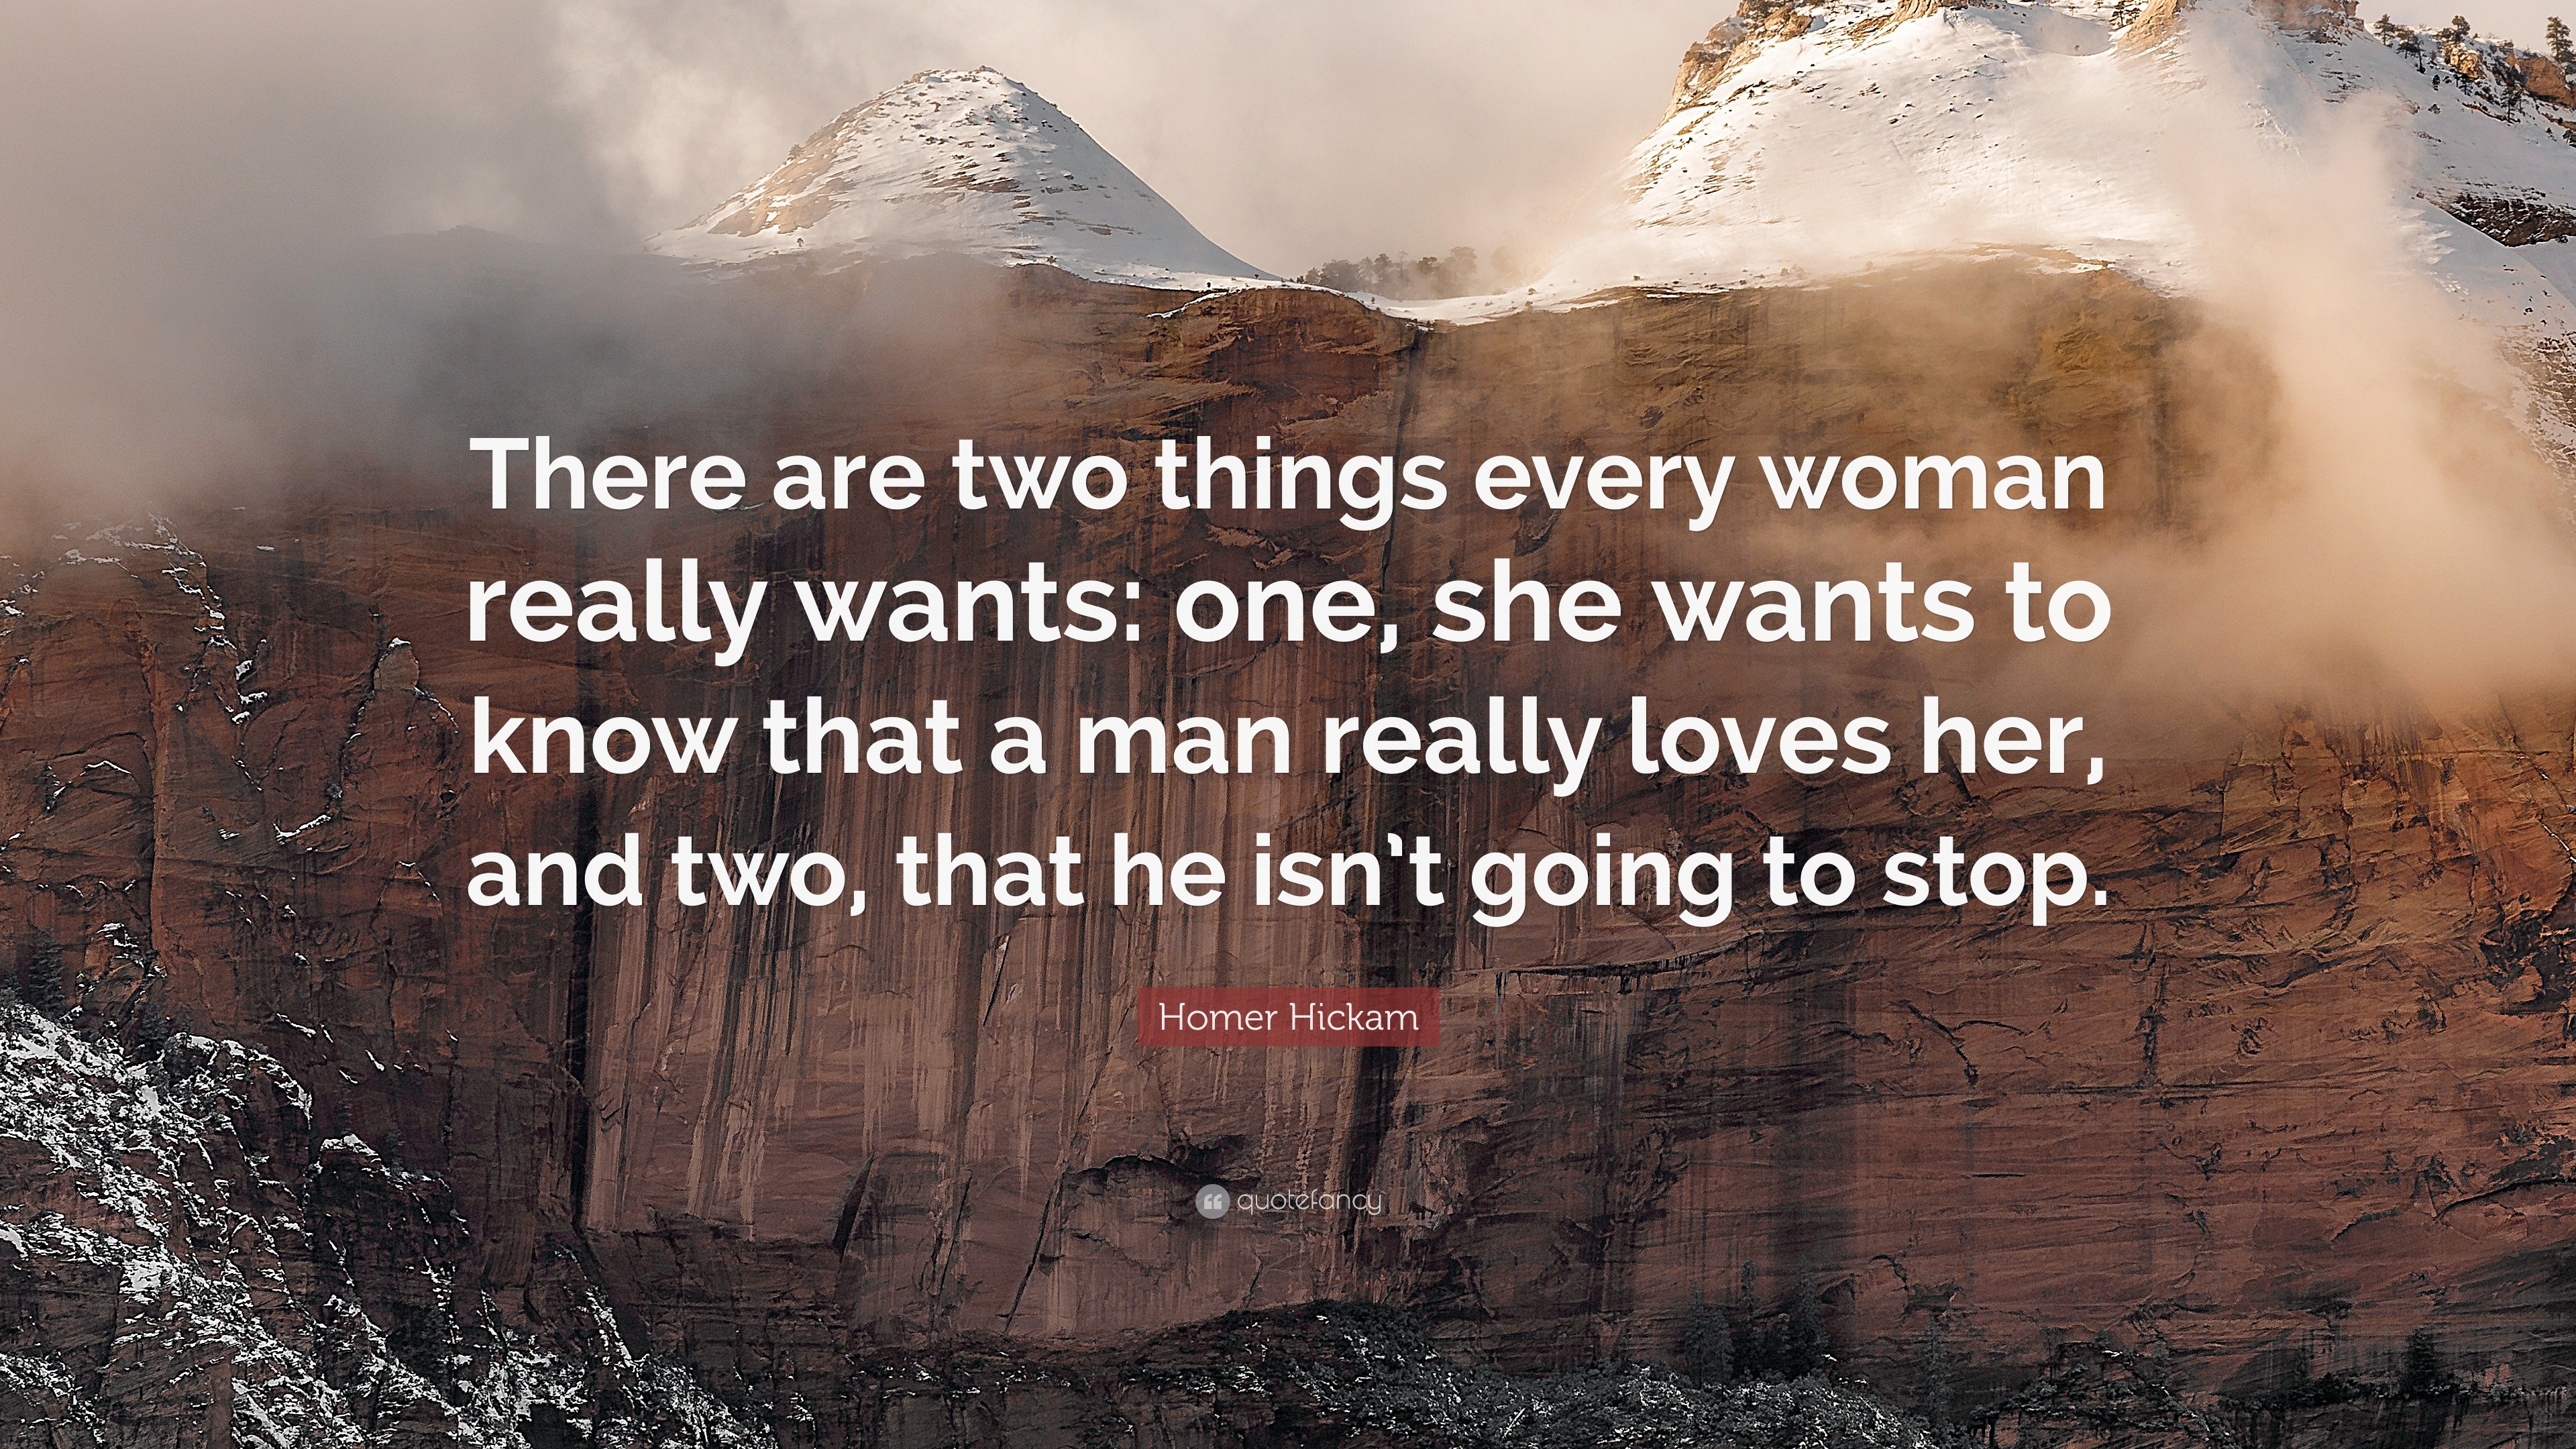 Homer Hickam Quote “There are two things every woman really wants one